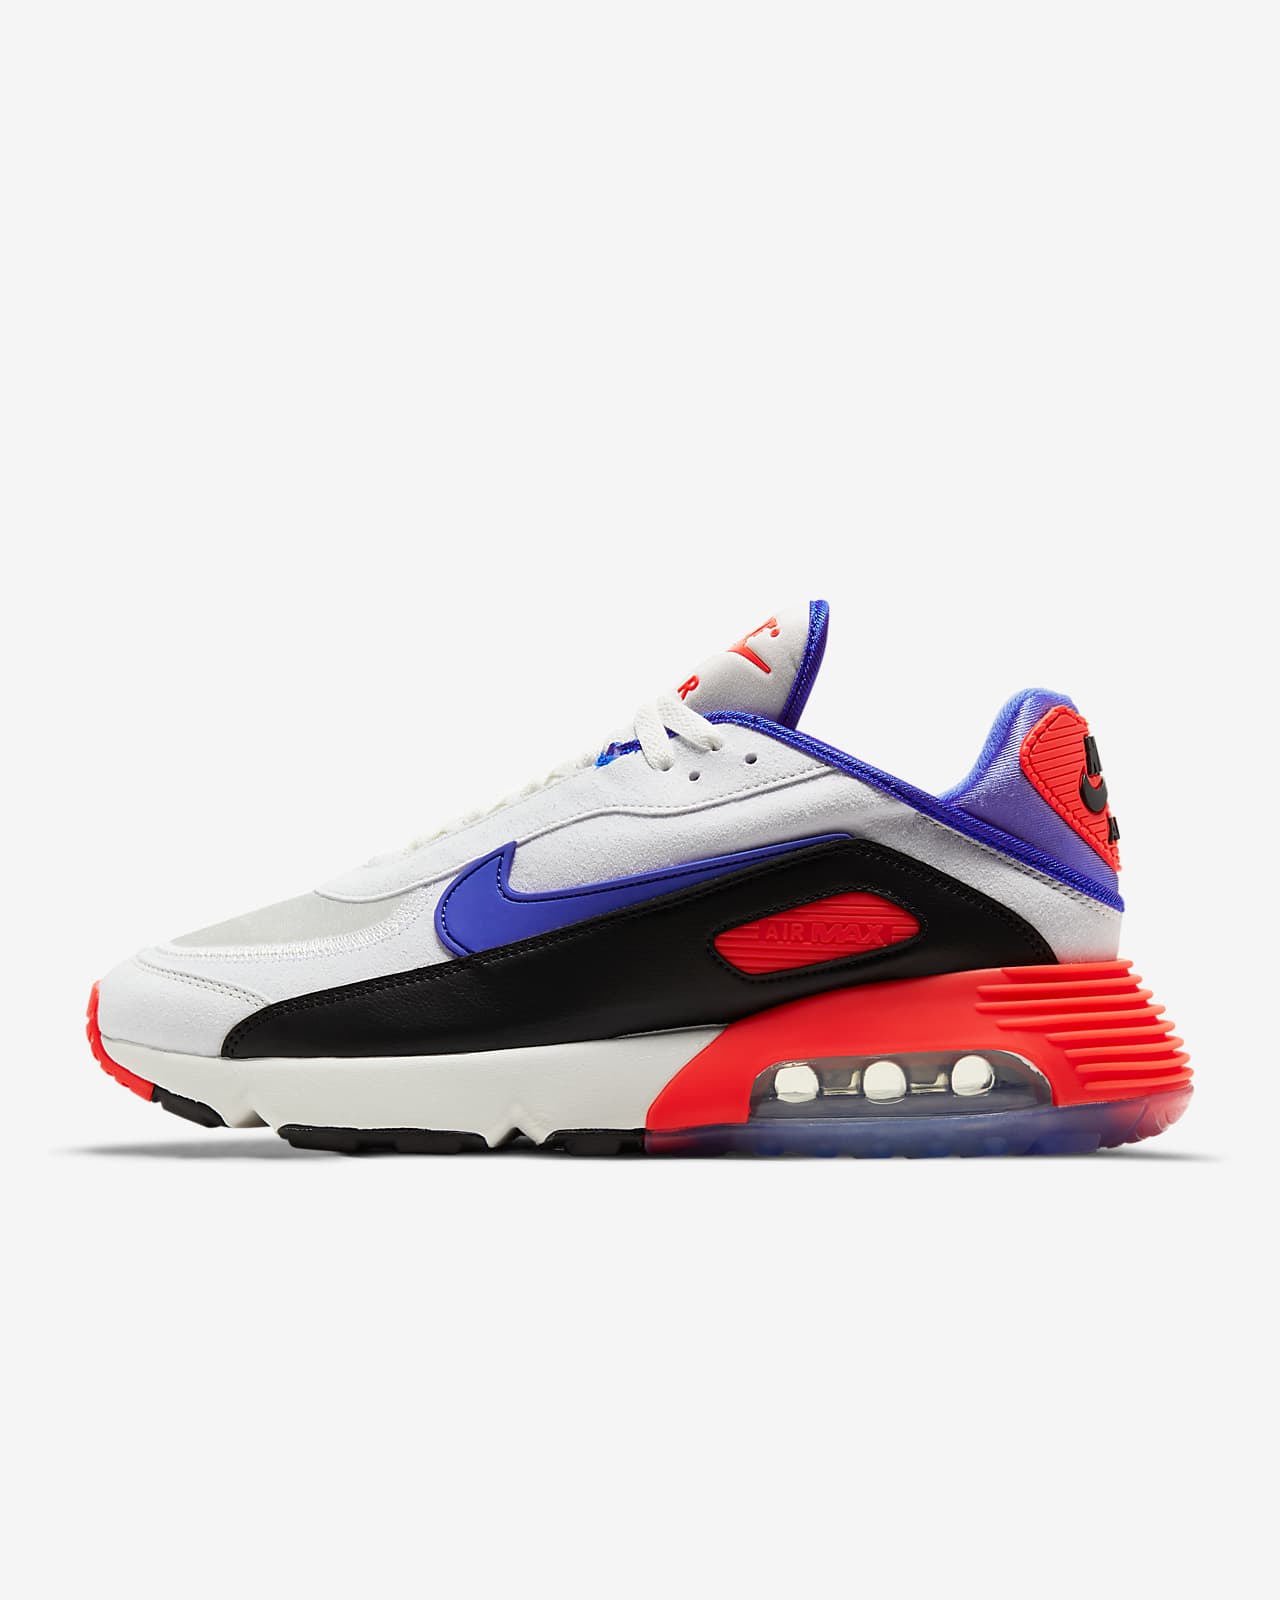 nike air max next day delivery